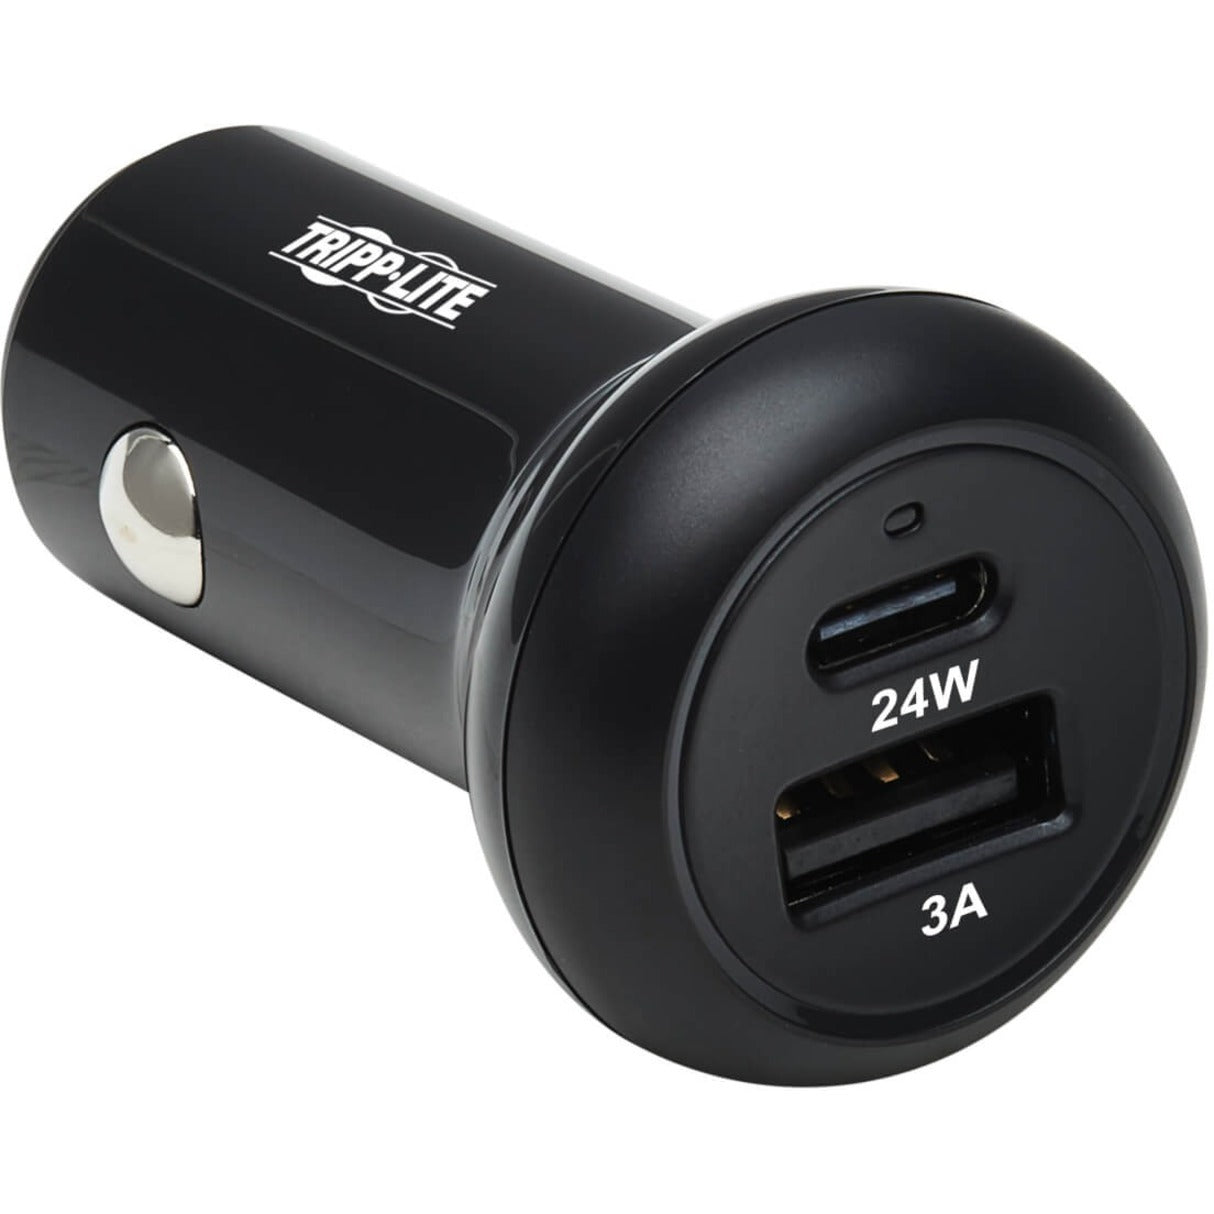 Tripp Lite U280-C02-24W-1B Auto Adapter, Dual Port USB Car Charger, 24W USB C USB-A, Fast Charging for Smartphones, Tablets, and More